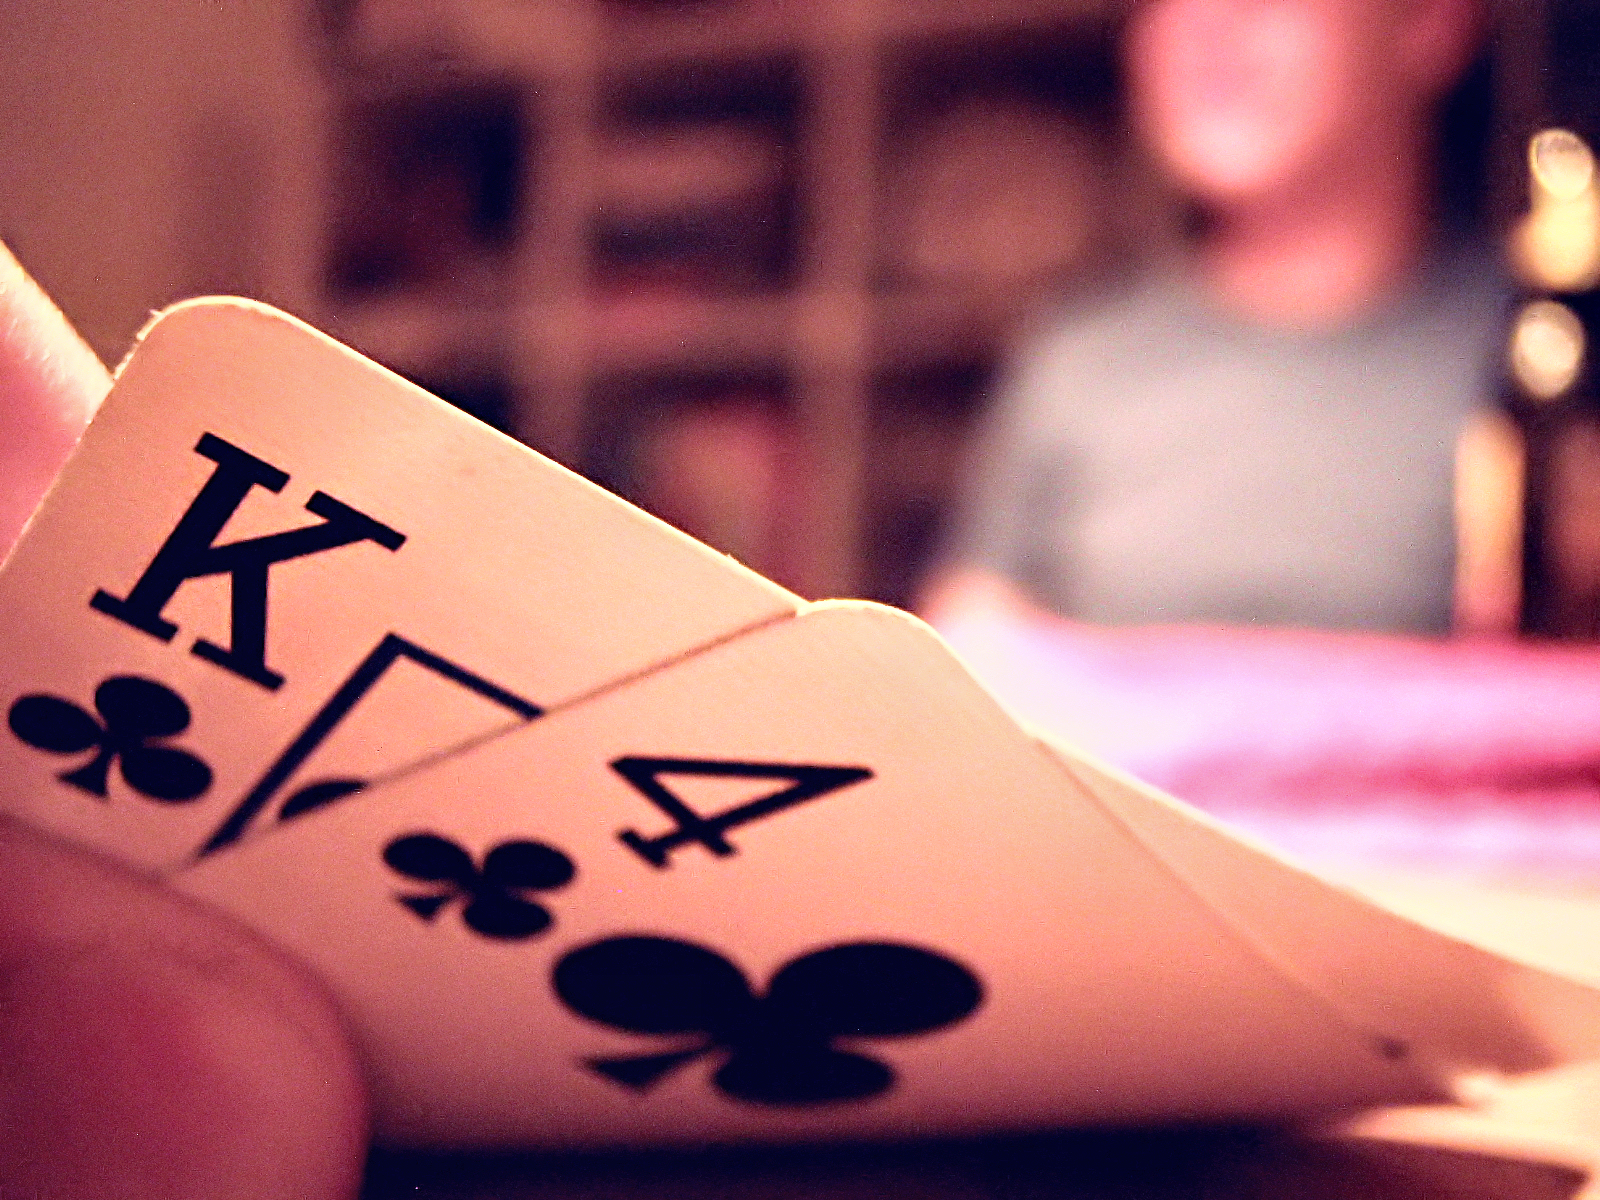 How to Play Texas Hold ’em Poker